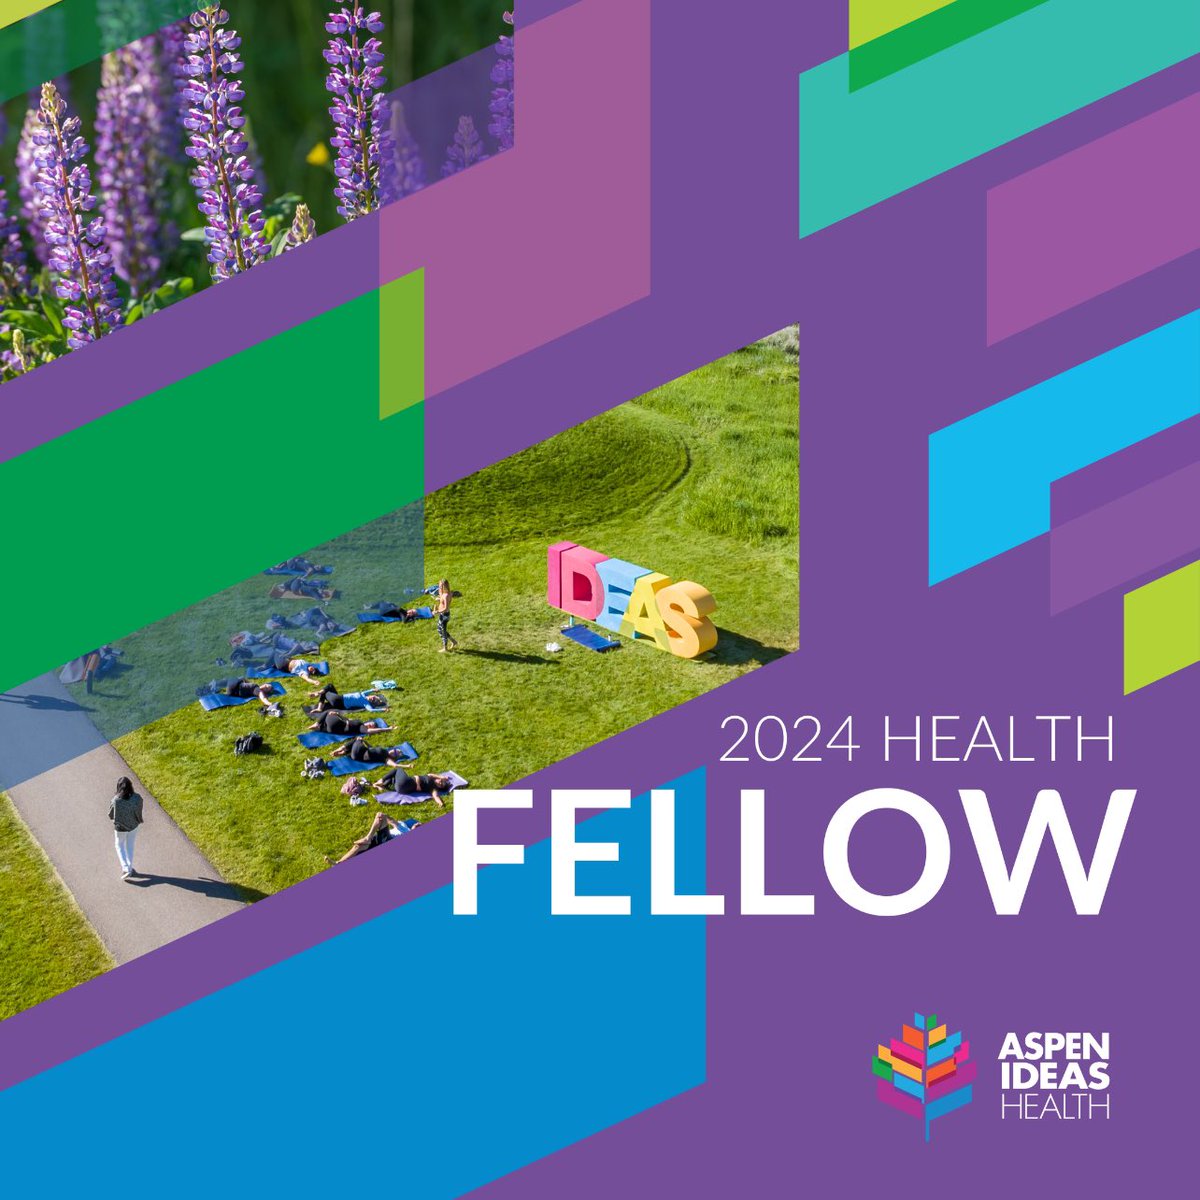 Twitter fam! I’m excited to share that I’ve been selected as a 2024 @AspenIdeas Health Fellow! 🎉 Looking forward to learning from today’s big thinkers in health & bringing my community- inspired ideas to the conversations! #AspenIdeasHealth